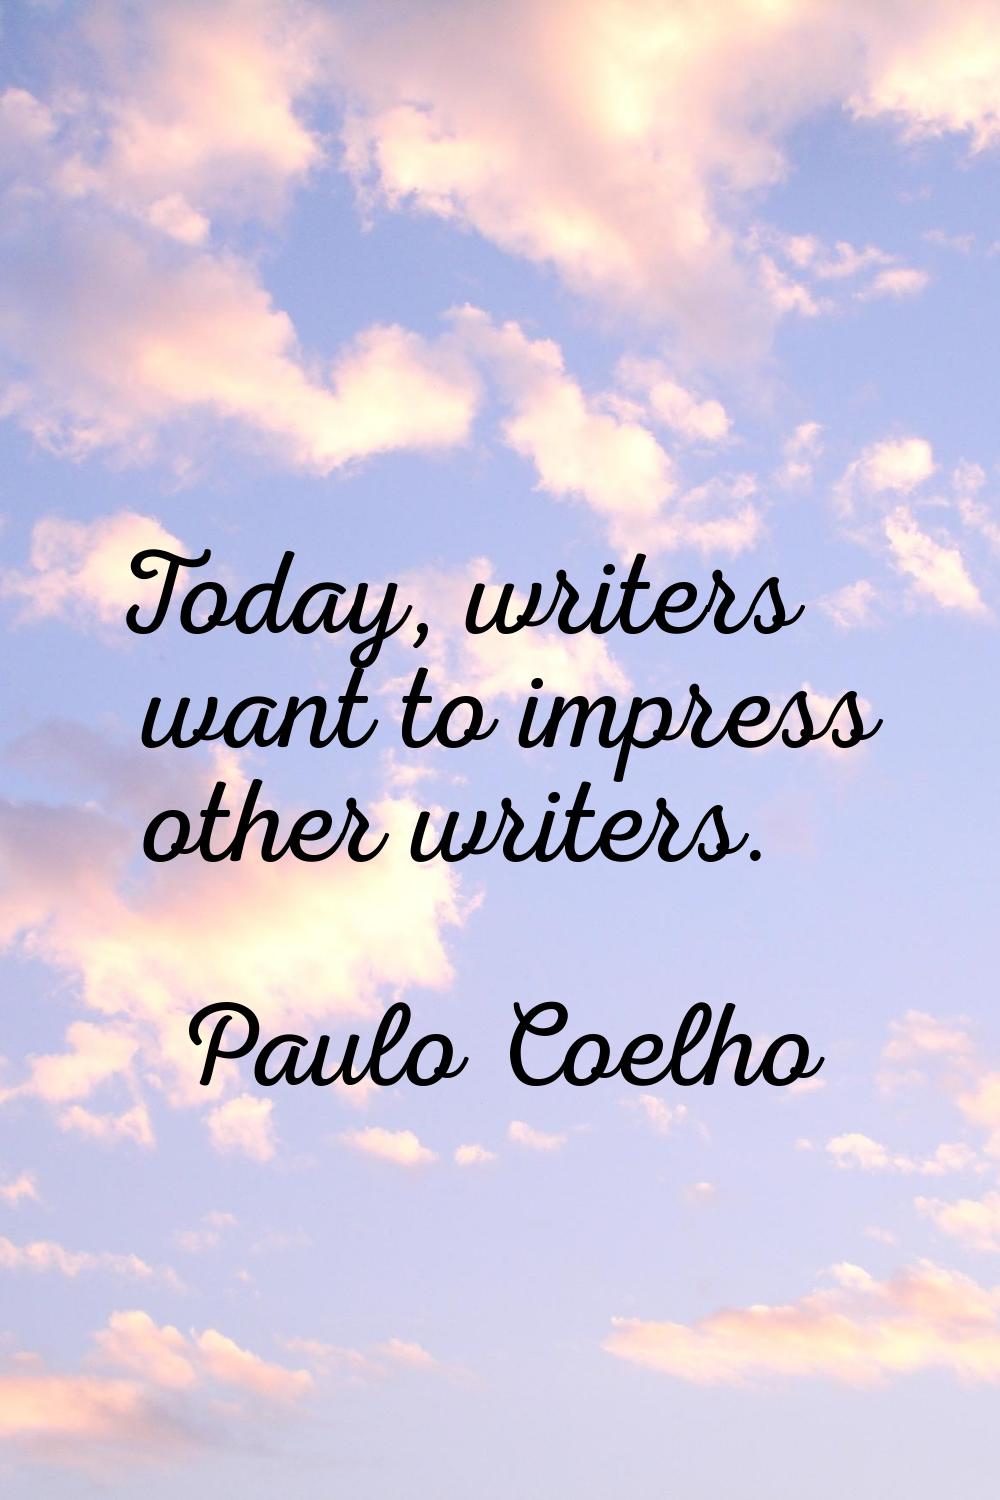 Today, writers want to impress other writers.